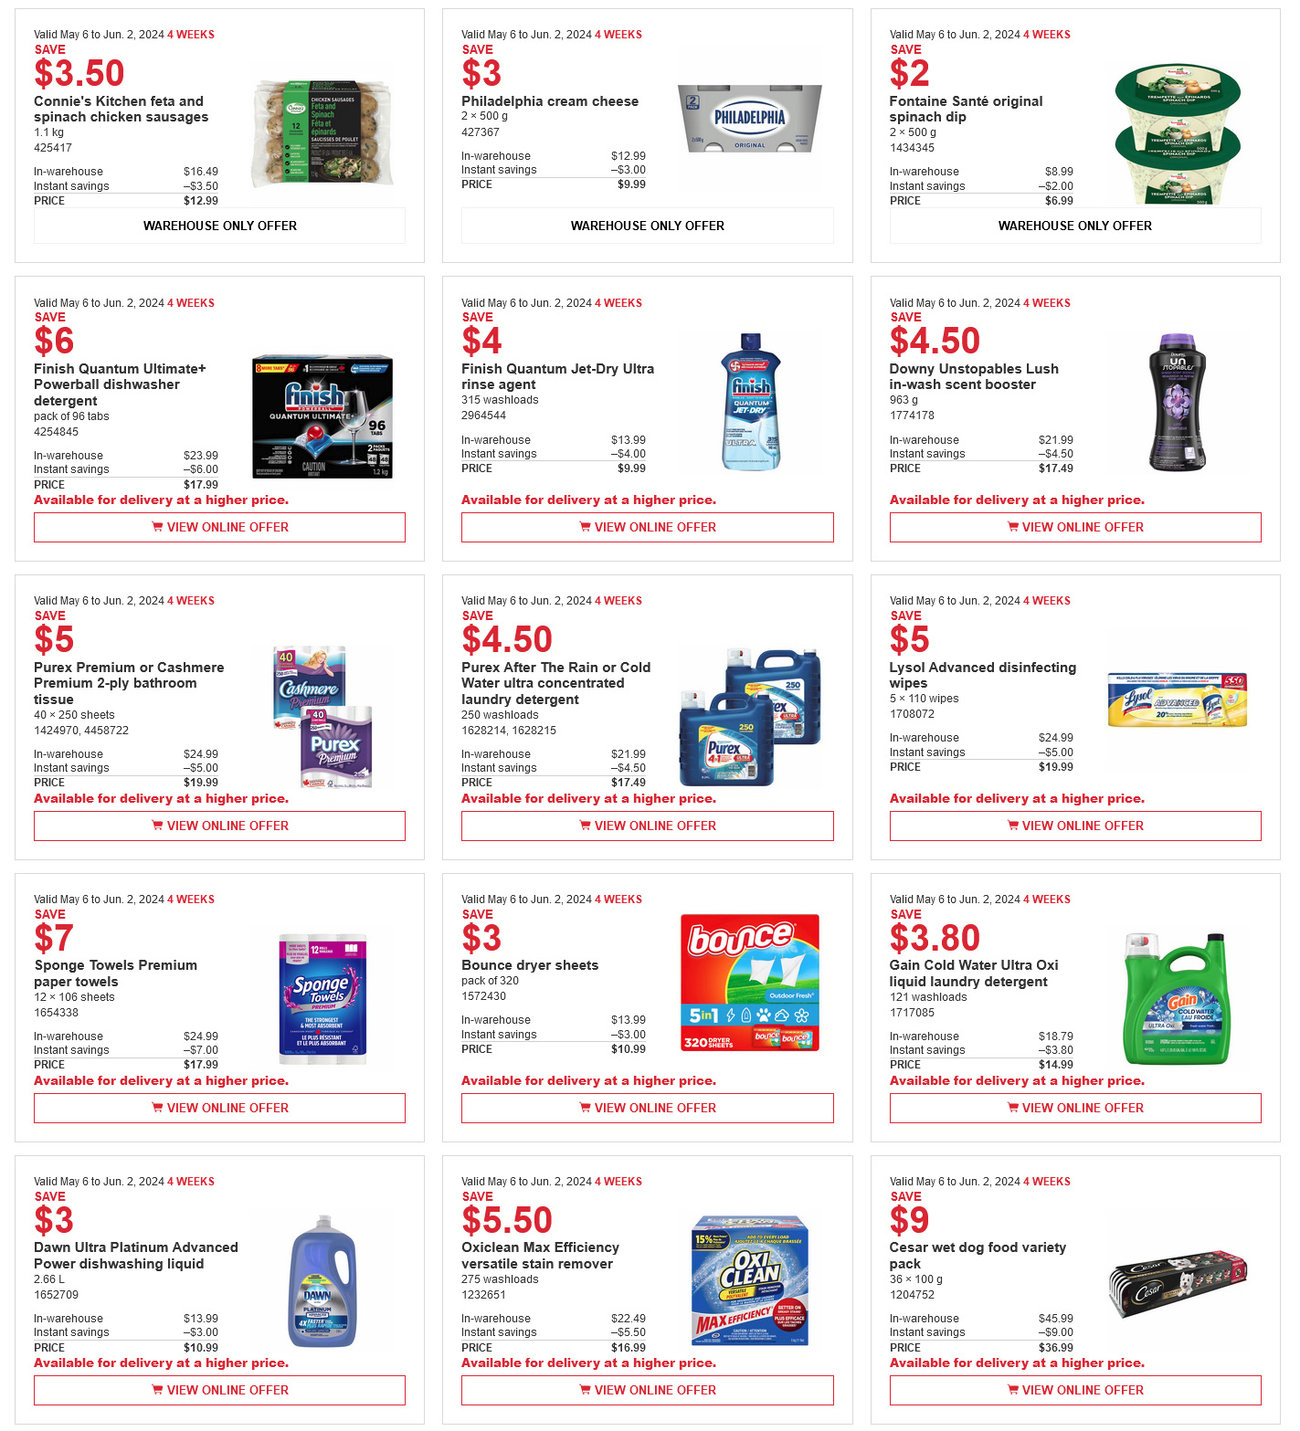 Costco Flyer - Savings & Coupons at your Local Warehouse and Online - Page 5